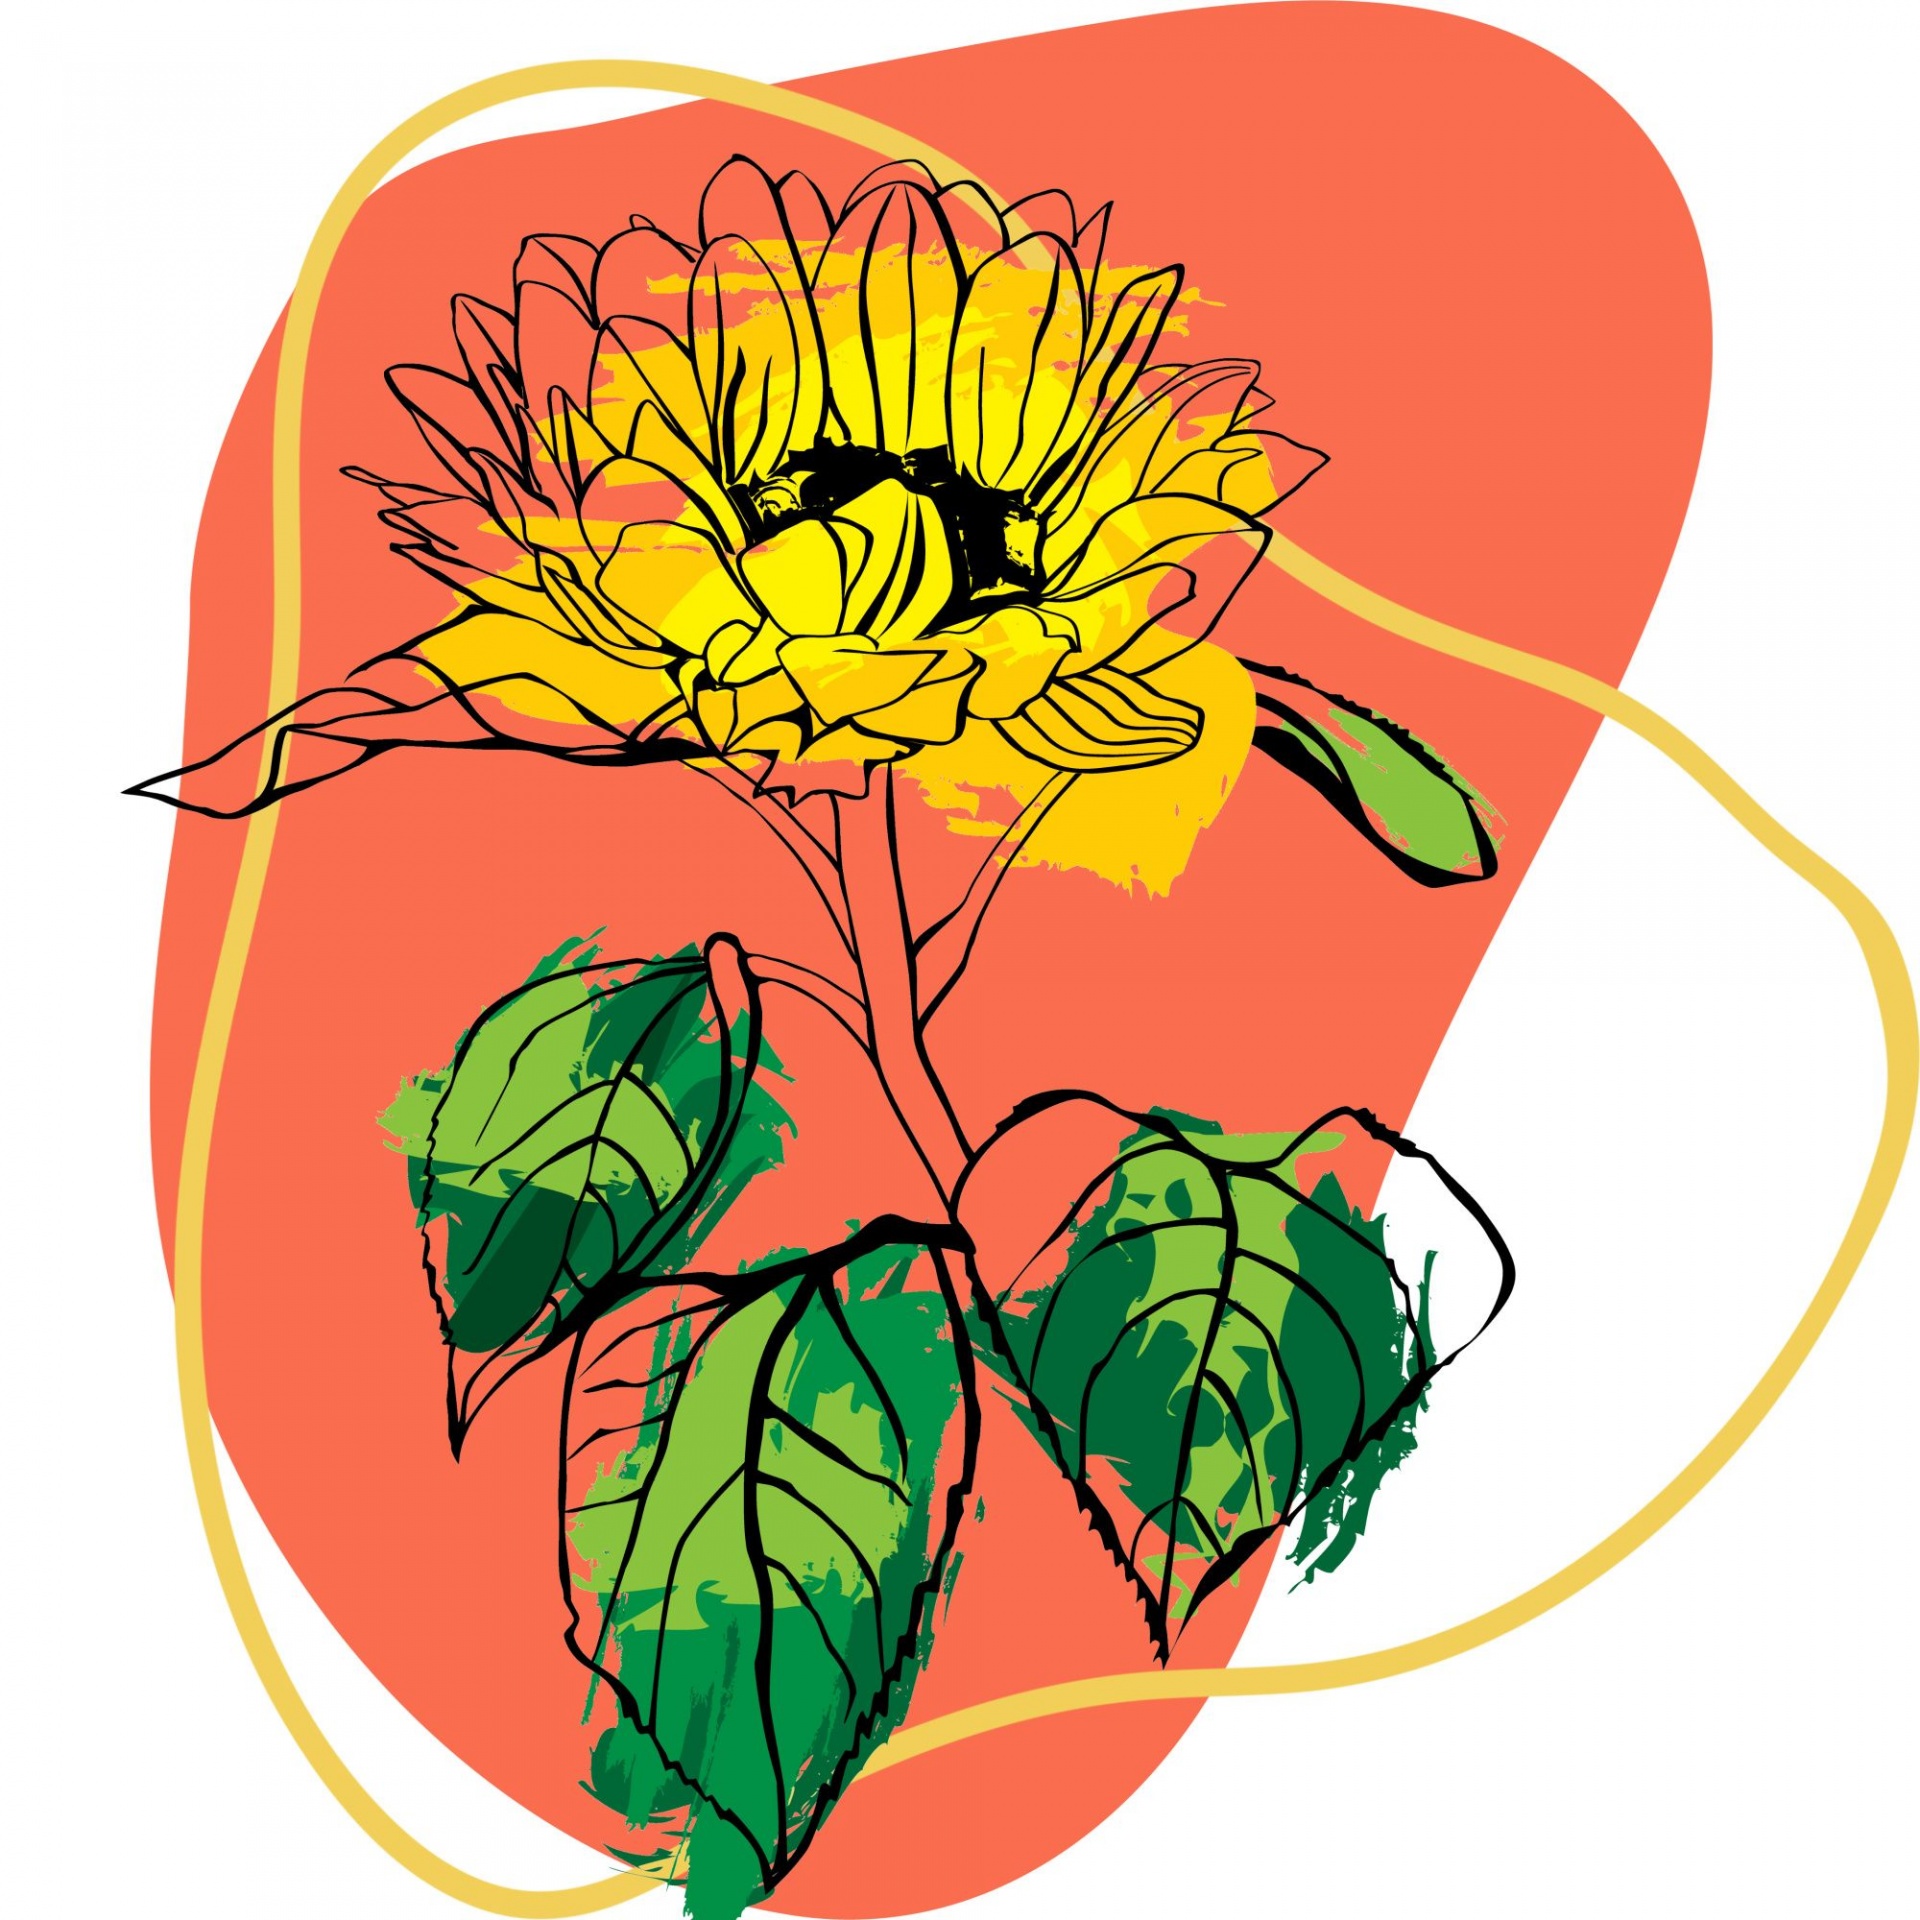 modern art rendition of a line-drawing sunflower on abstract shapes